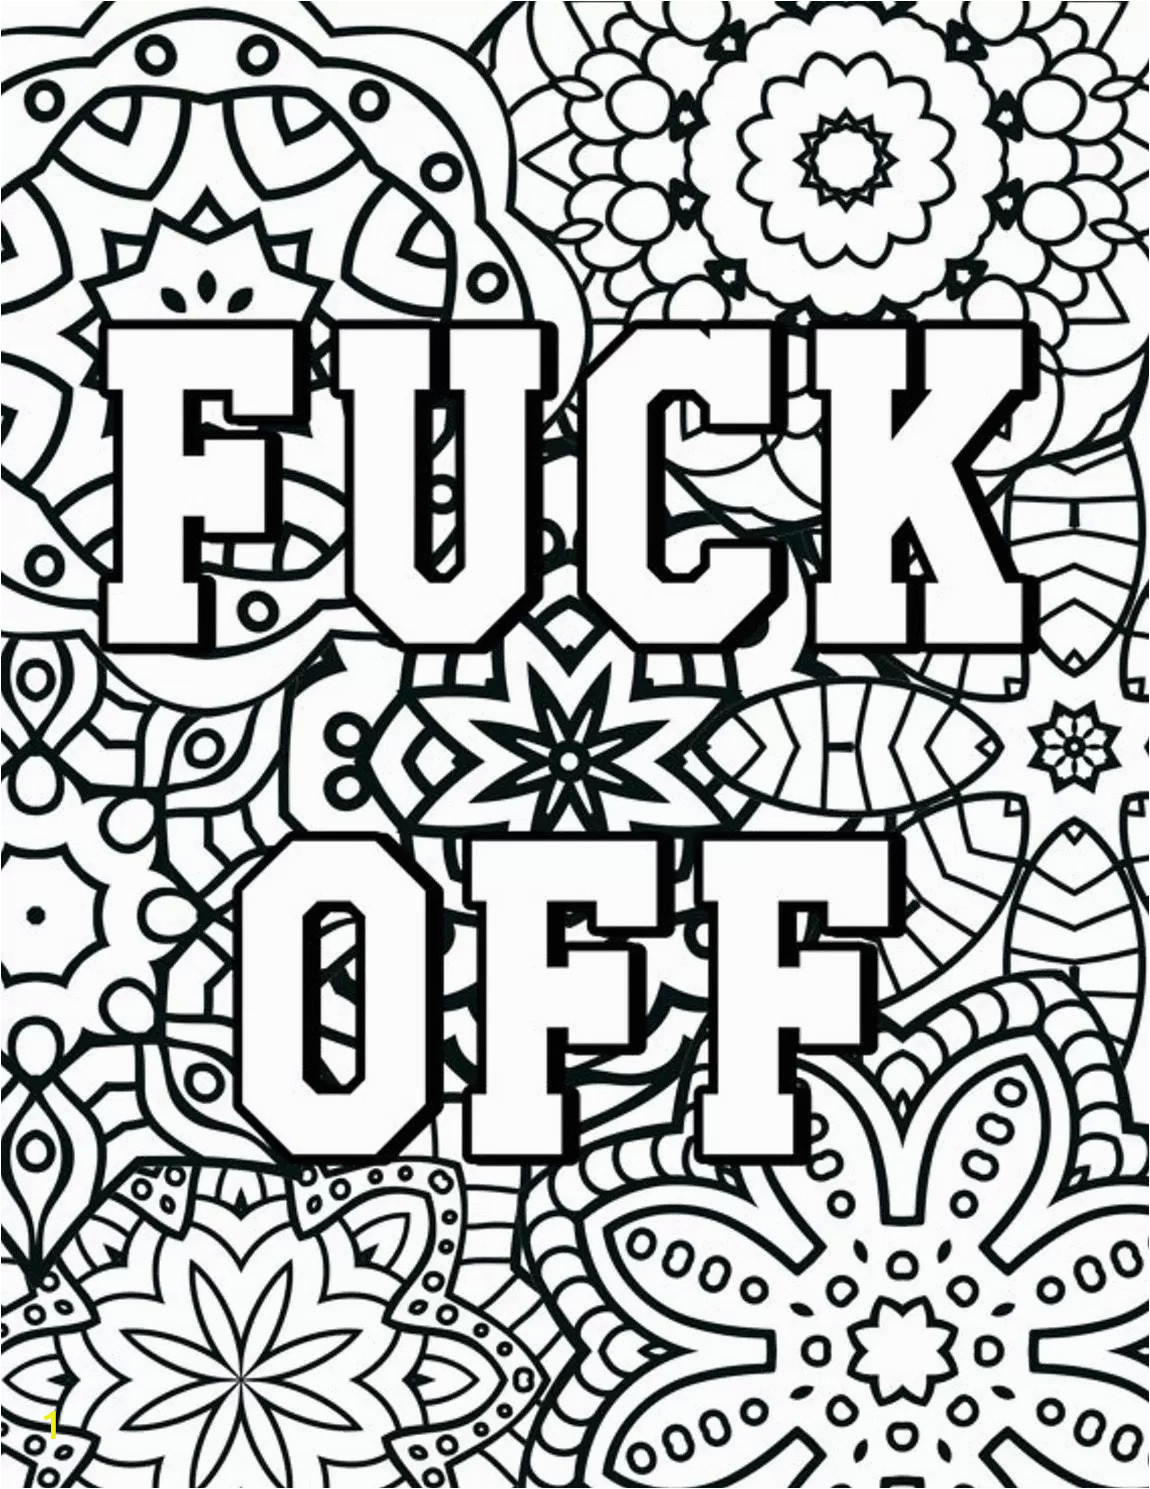 swear word coloring pages printable free for adults only words 0370c79d9f f2dde706aaa free